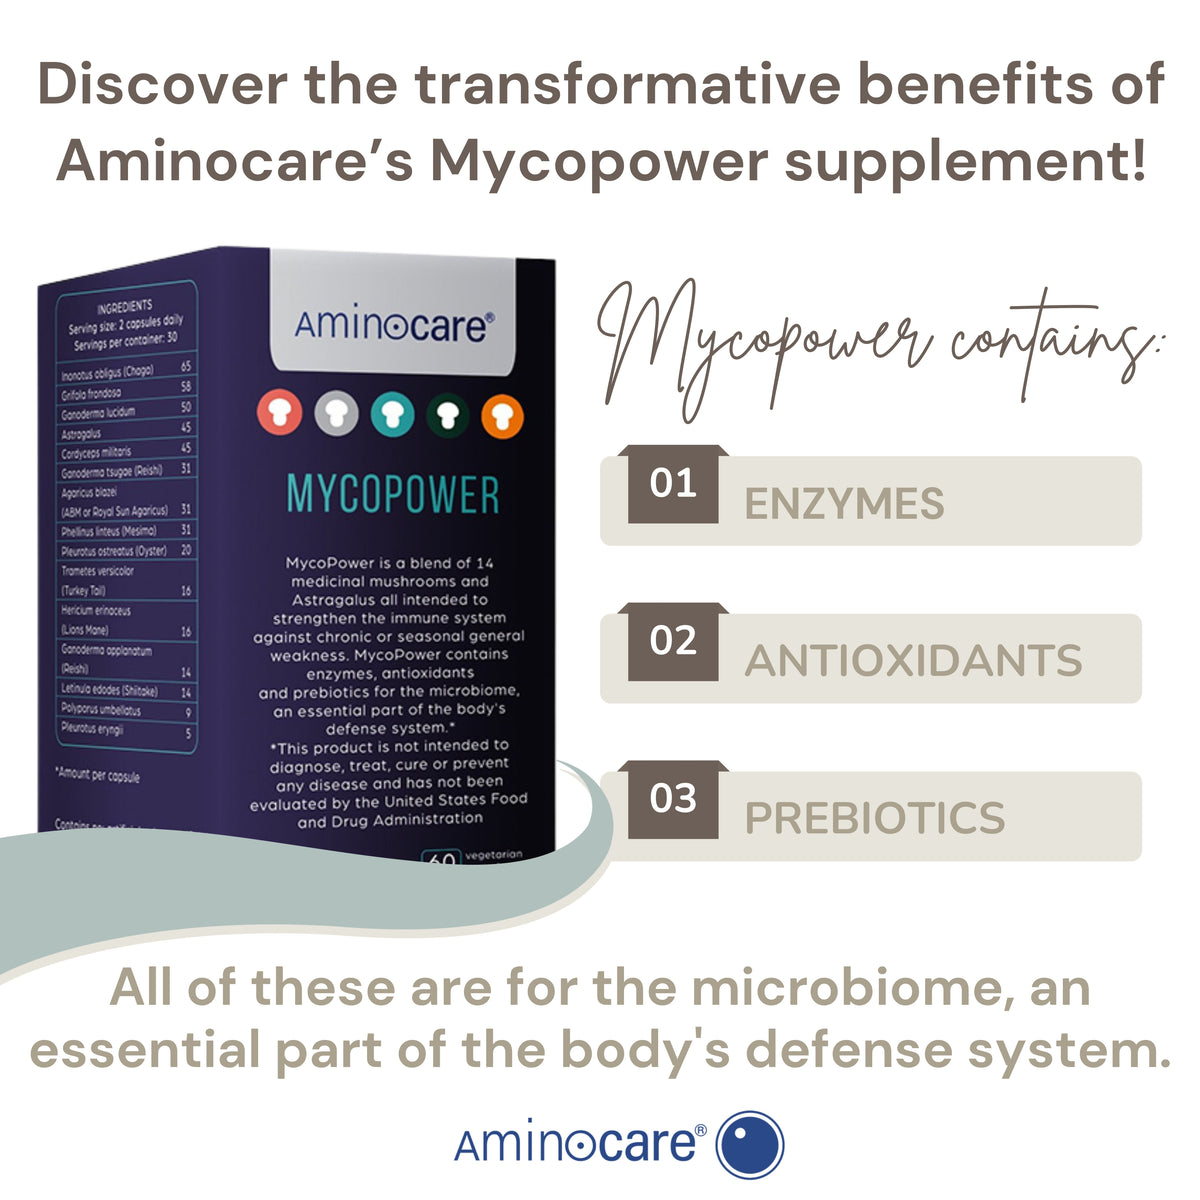 Discover the Benefits of Mycopower Medicinal Mushrooms Supplement